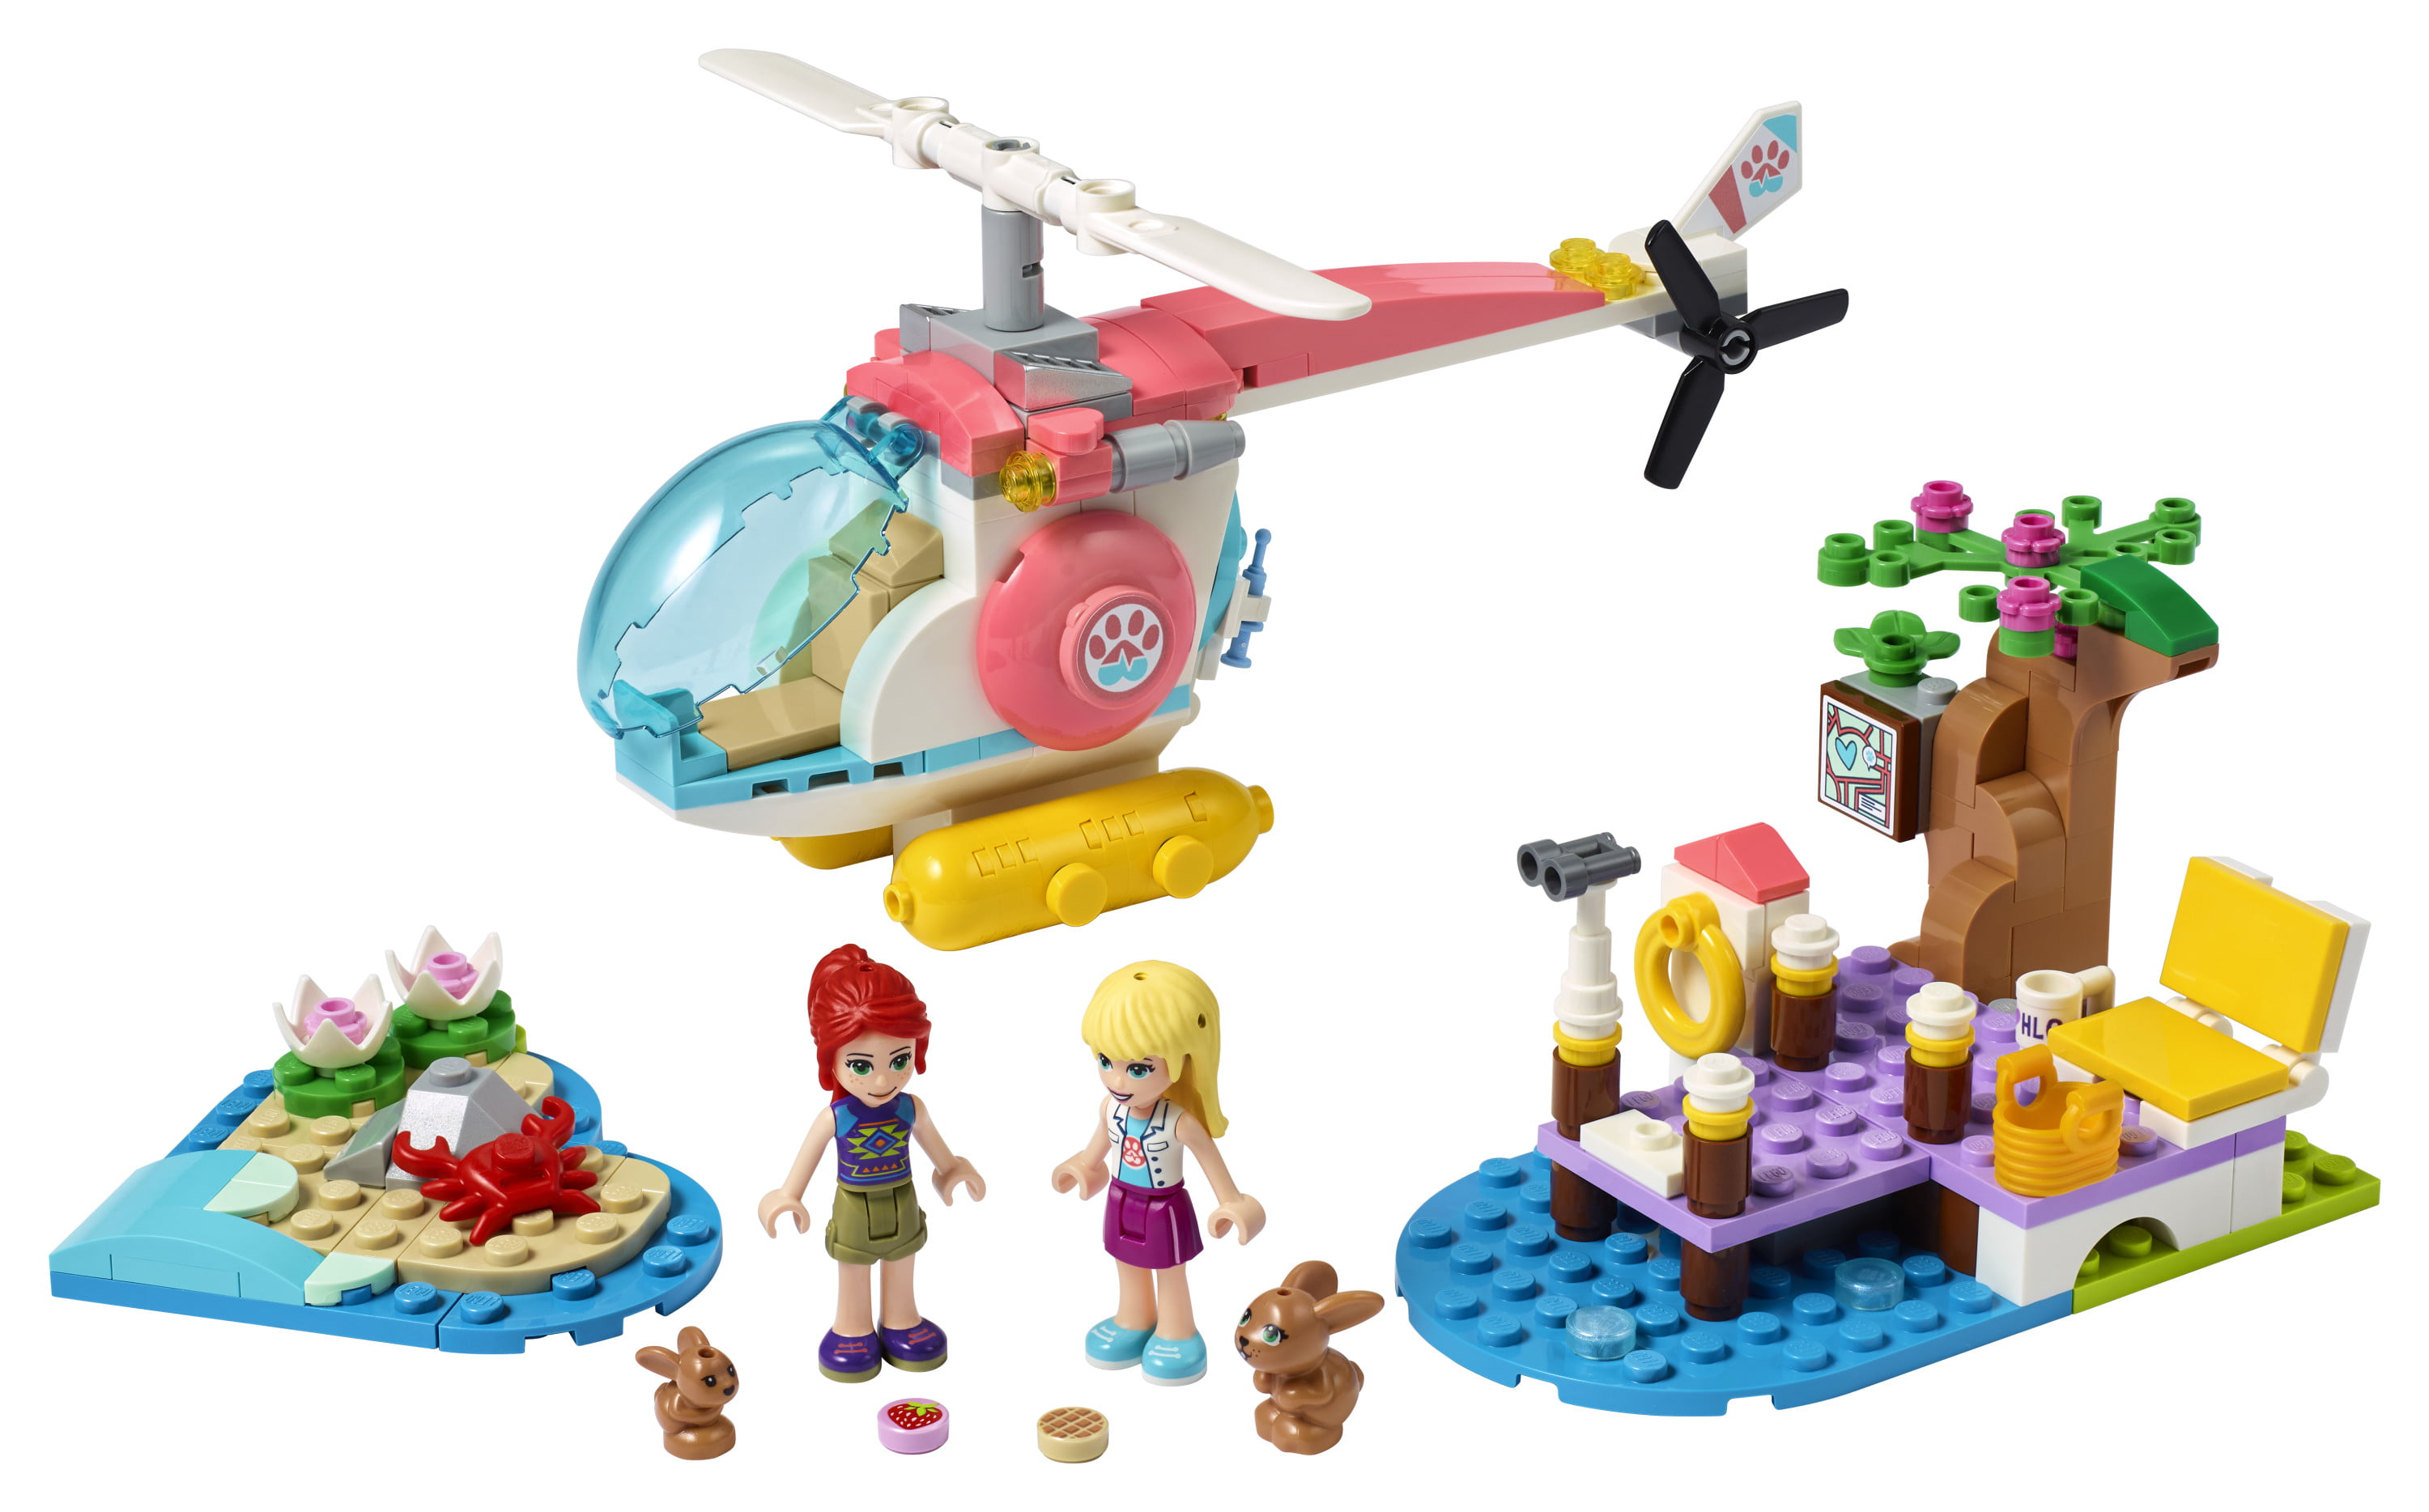 LEGO Friends Vet Clinic Rescue Helicopter 41692; Toy Makes Great Gift for Kids (249 Pieces) - Walmart.com